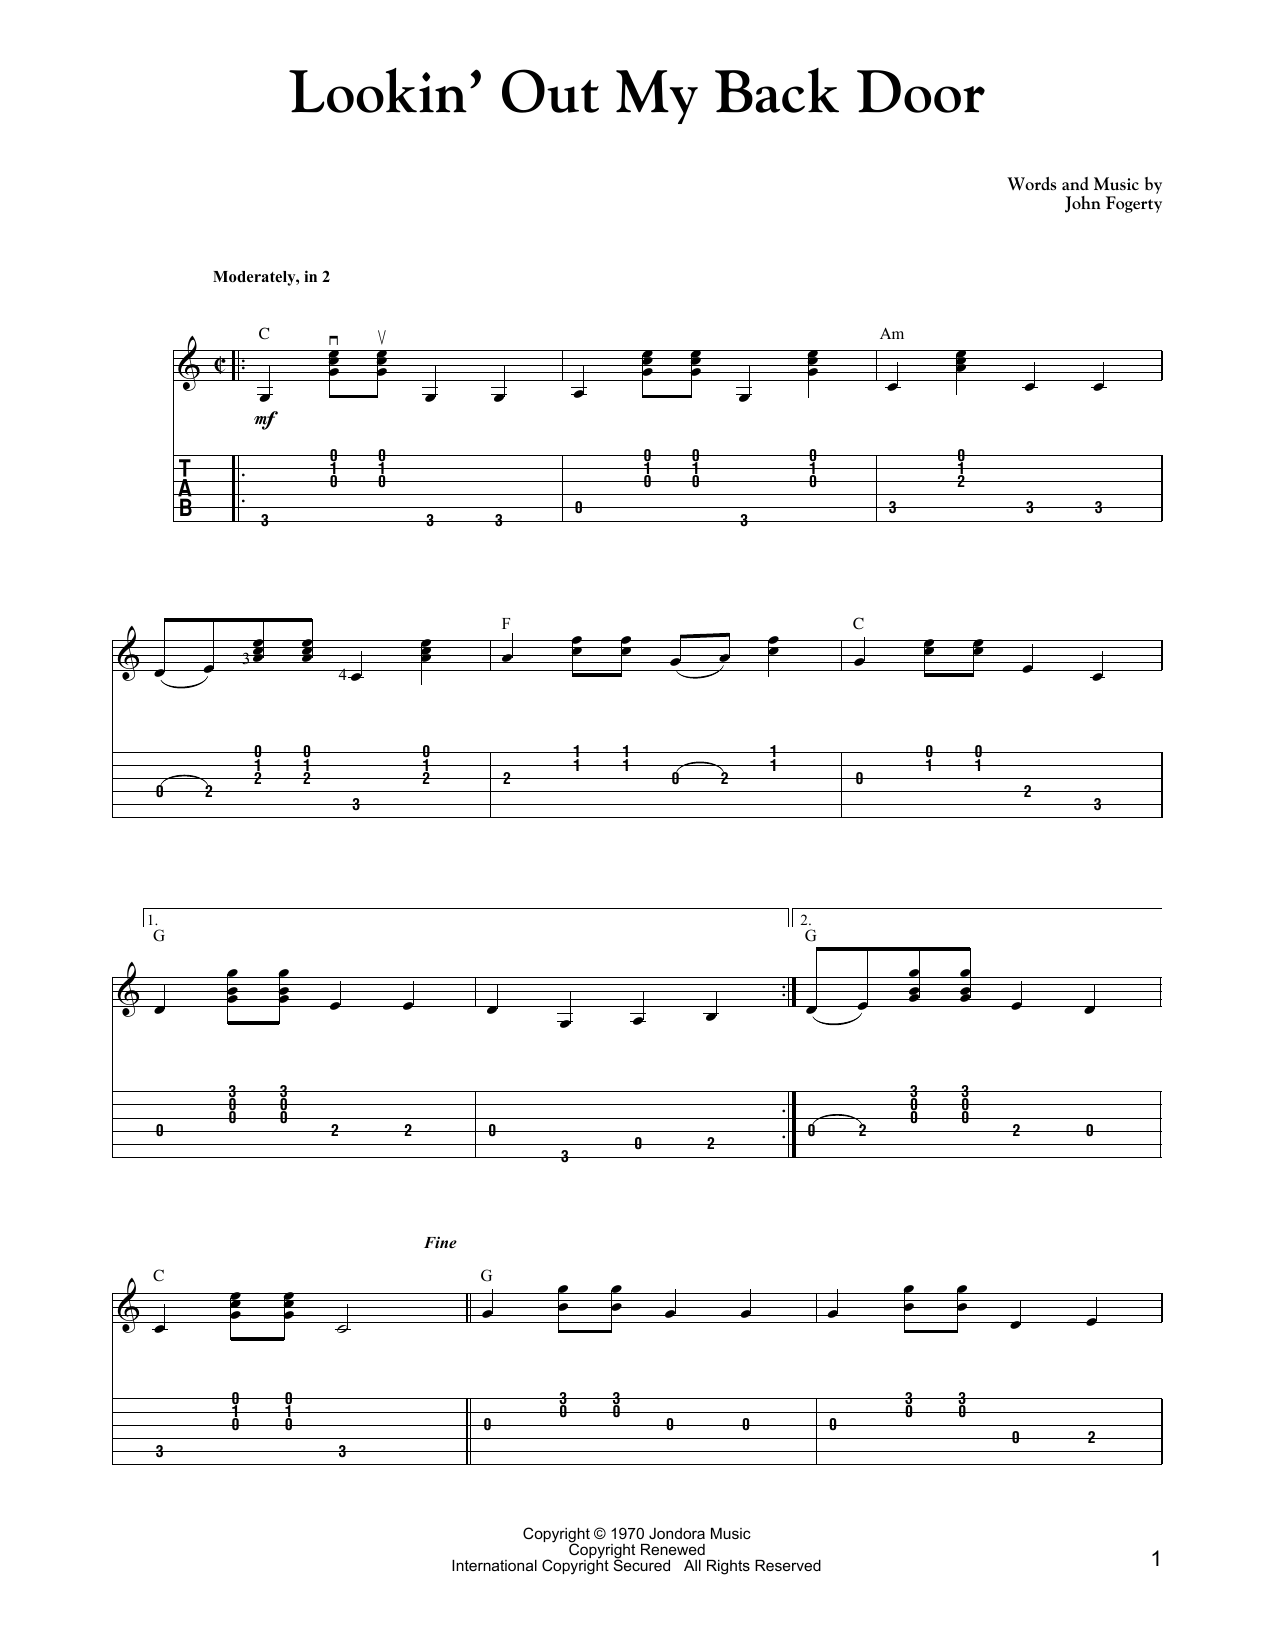 Download Carter Style Guitar Lookin' Out My Back Door Sheet Music